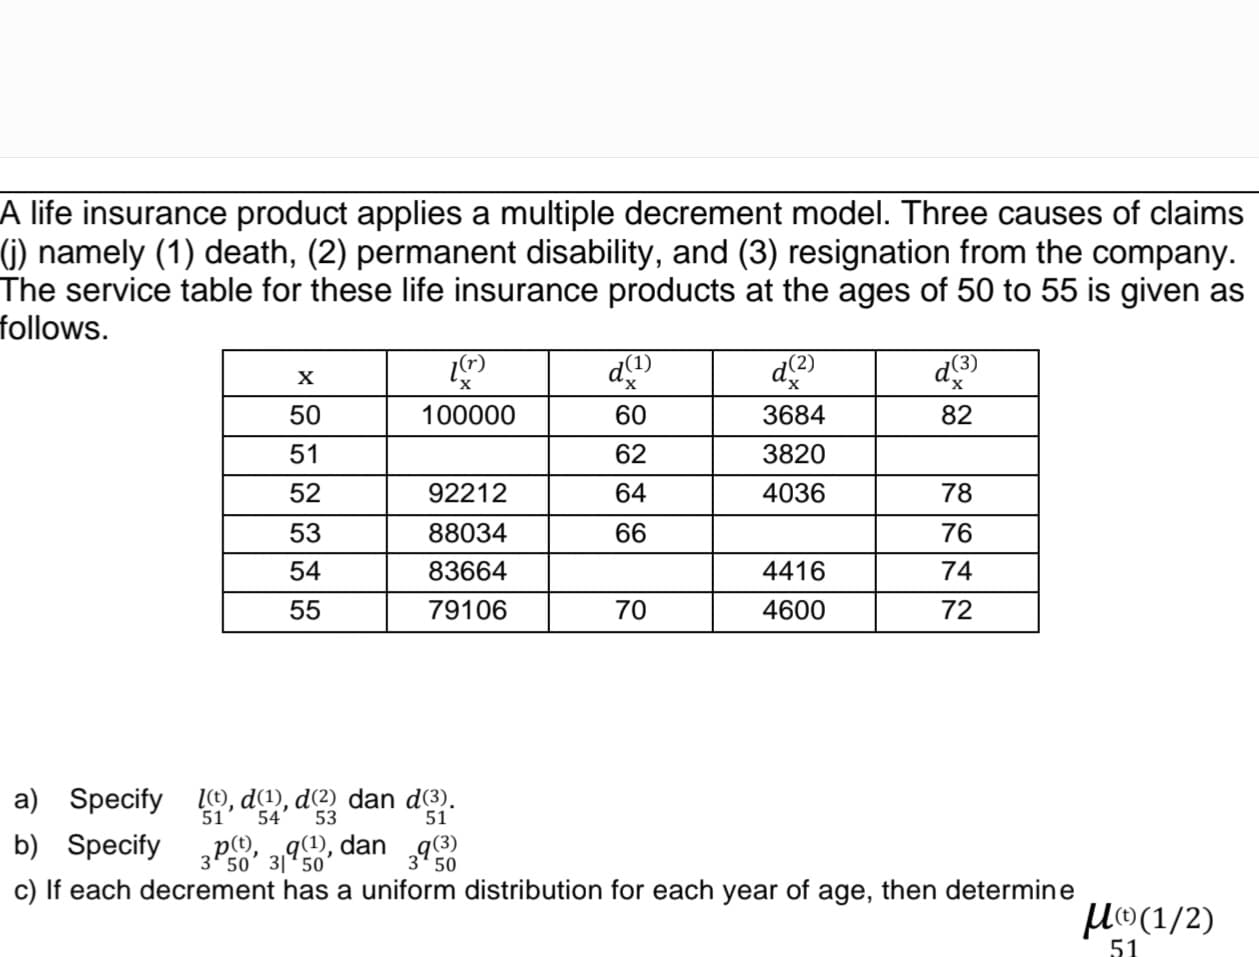 A life insurance product applies a multiple decrement model. Three causes of claims
(j) namely (1) death, (2) permanent disability, and (3) resignation from the company.
The service table for these life insurance products at the ages of 50 to 55 is given as
follows.
X
50
51
52
53
54
55
[(r)
100000
92212
88034
83664
79106
Specify l), d(1), d(2) dan d(3³).
51 54 53
51
60
62
64
66
70
3684
3820
4036
4416
4600
d(³)
82
78
76
74
72
a)
b) Specify 3P50, 390, dan 393)
50
50
c) If each decrement has a uniform distribution for each year of age, then determine
μ®(1/2)
51